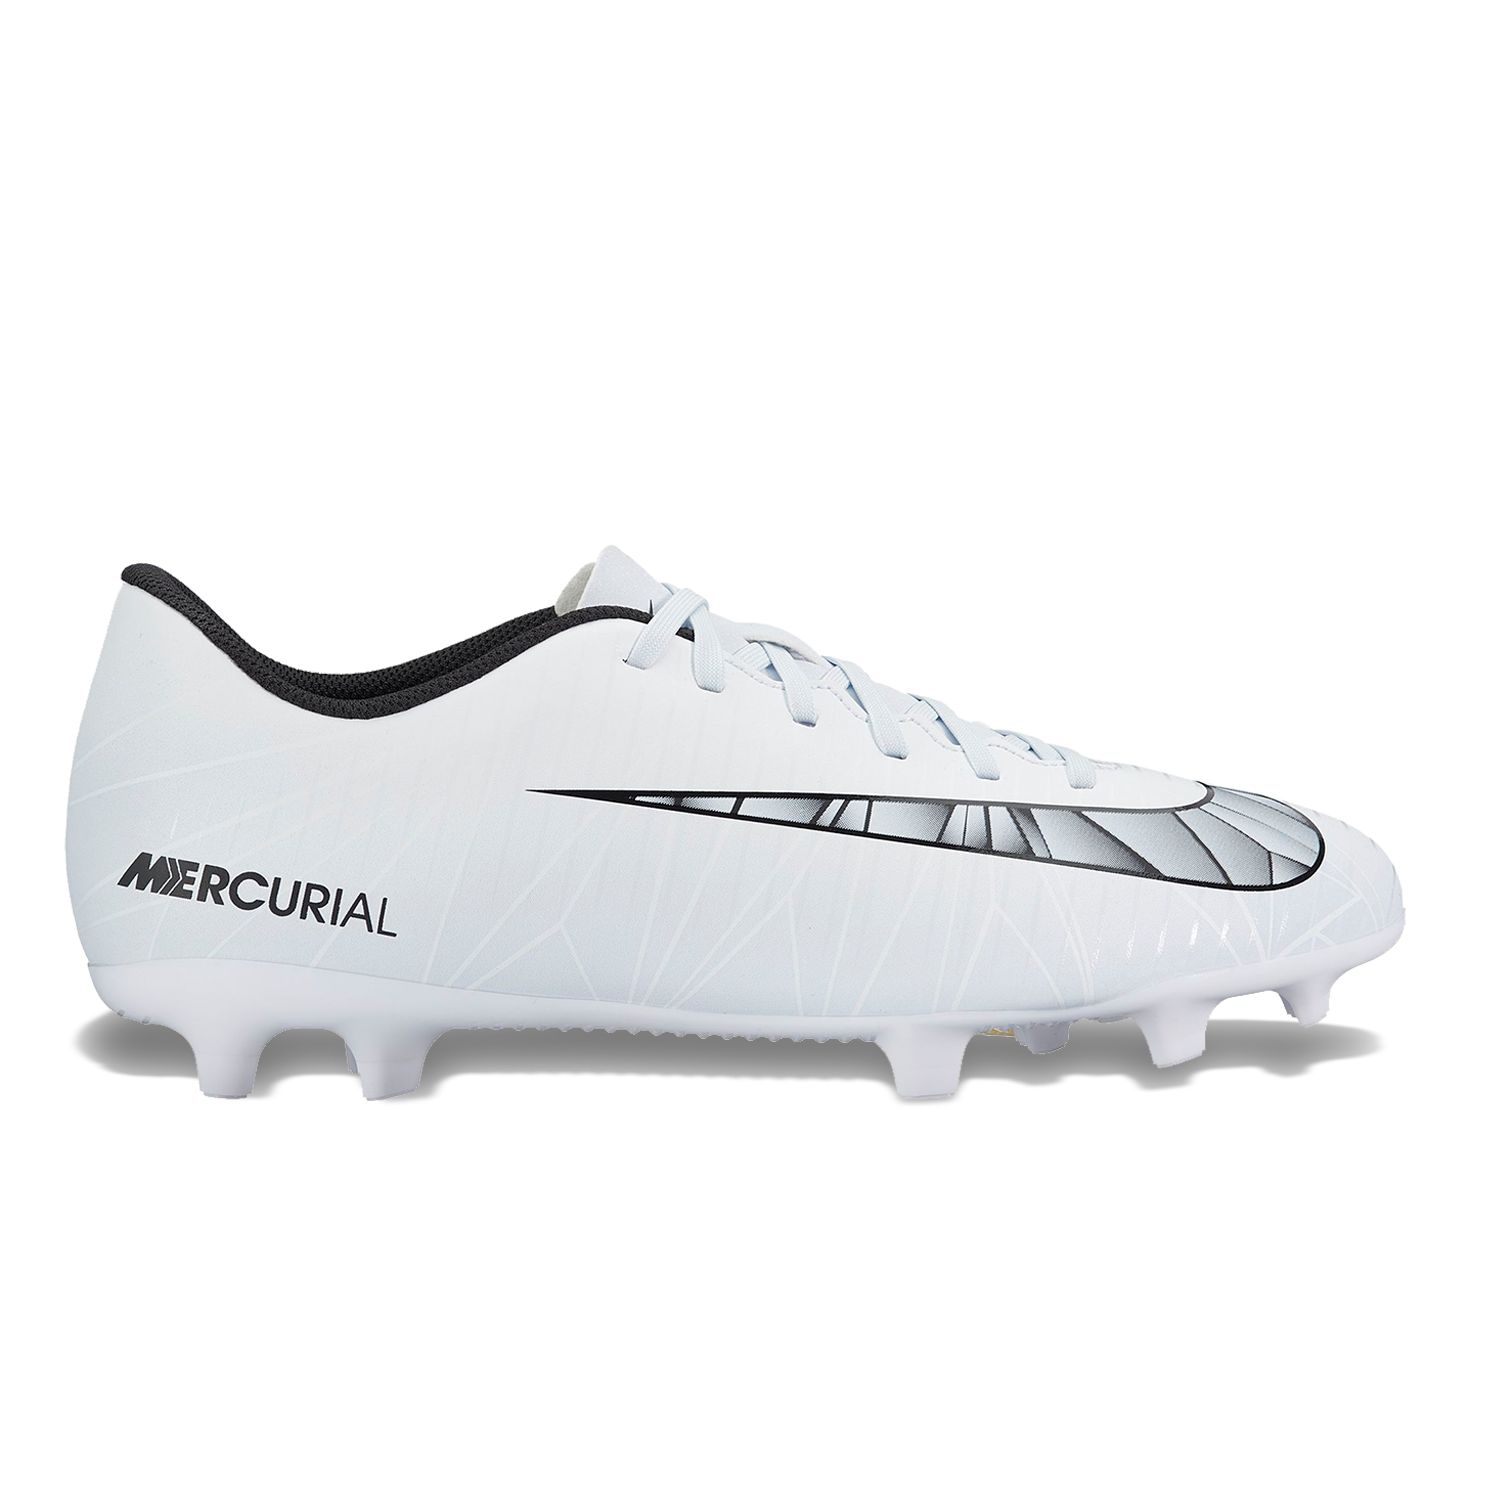 white cr7 soccer cleats